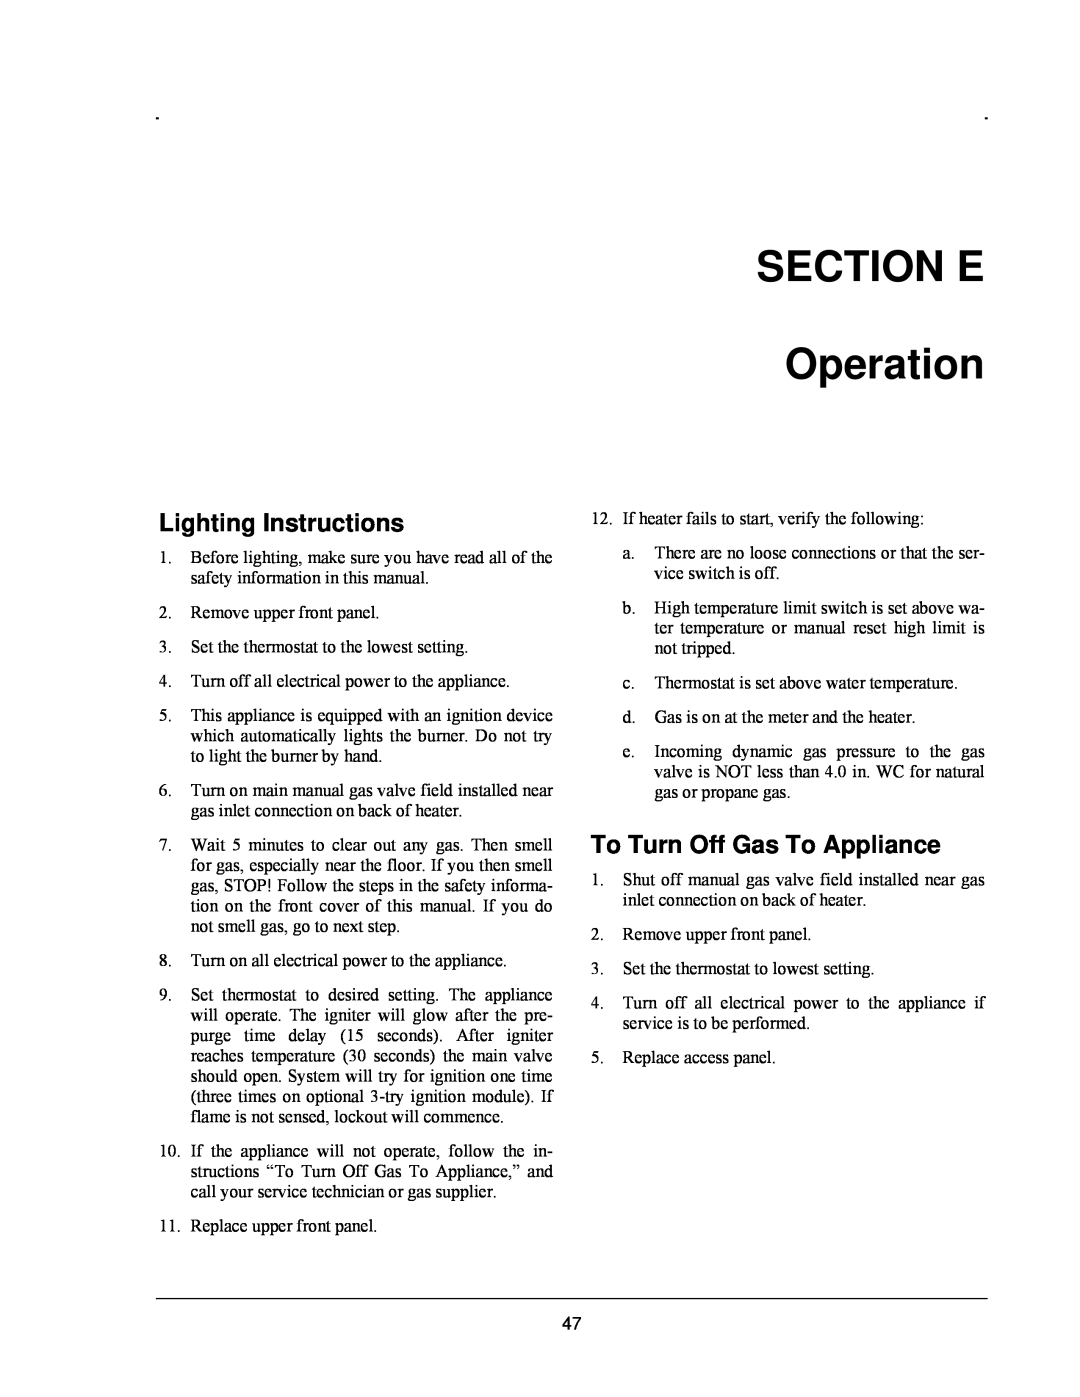 Raypak 503-2003 manual SECTION E Operation, Lighting Instructions, To Turn Off Gas To Appliance 